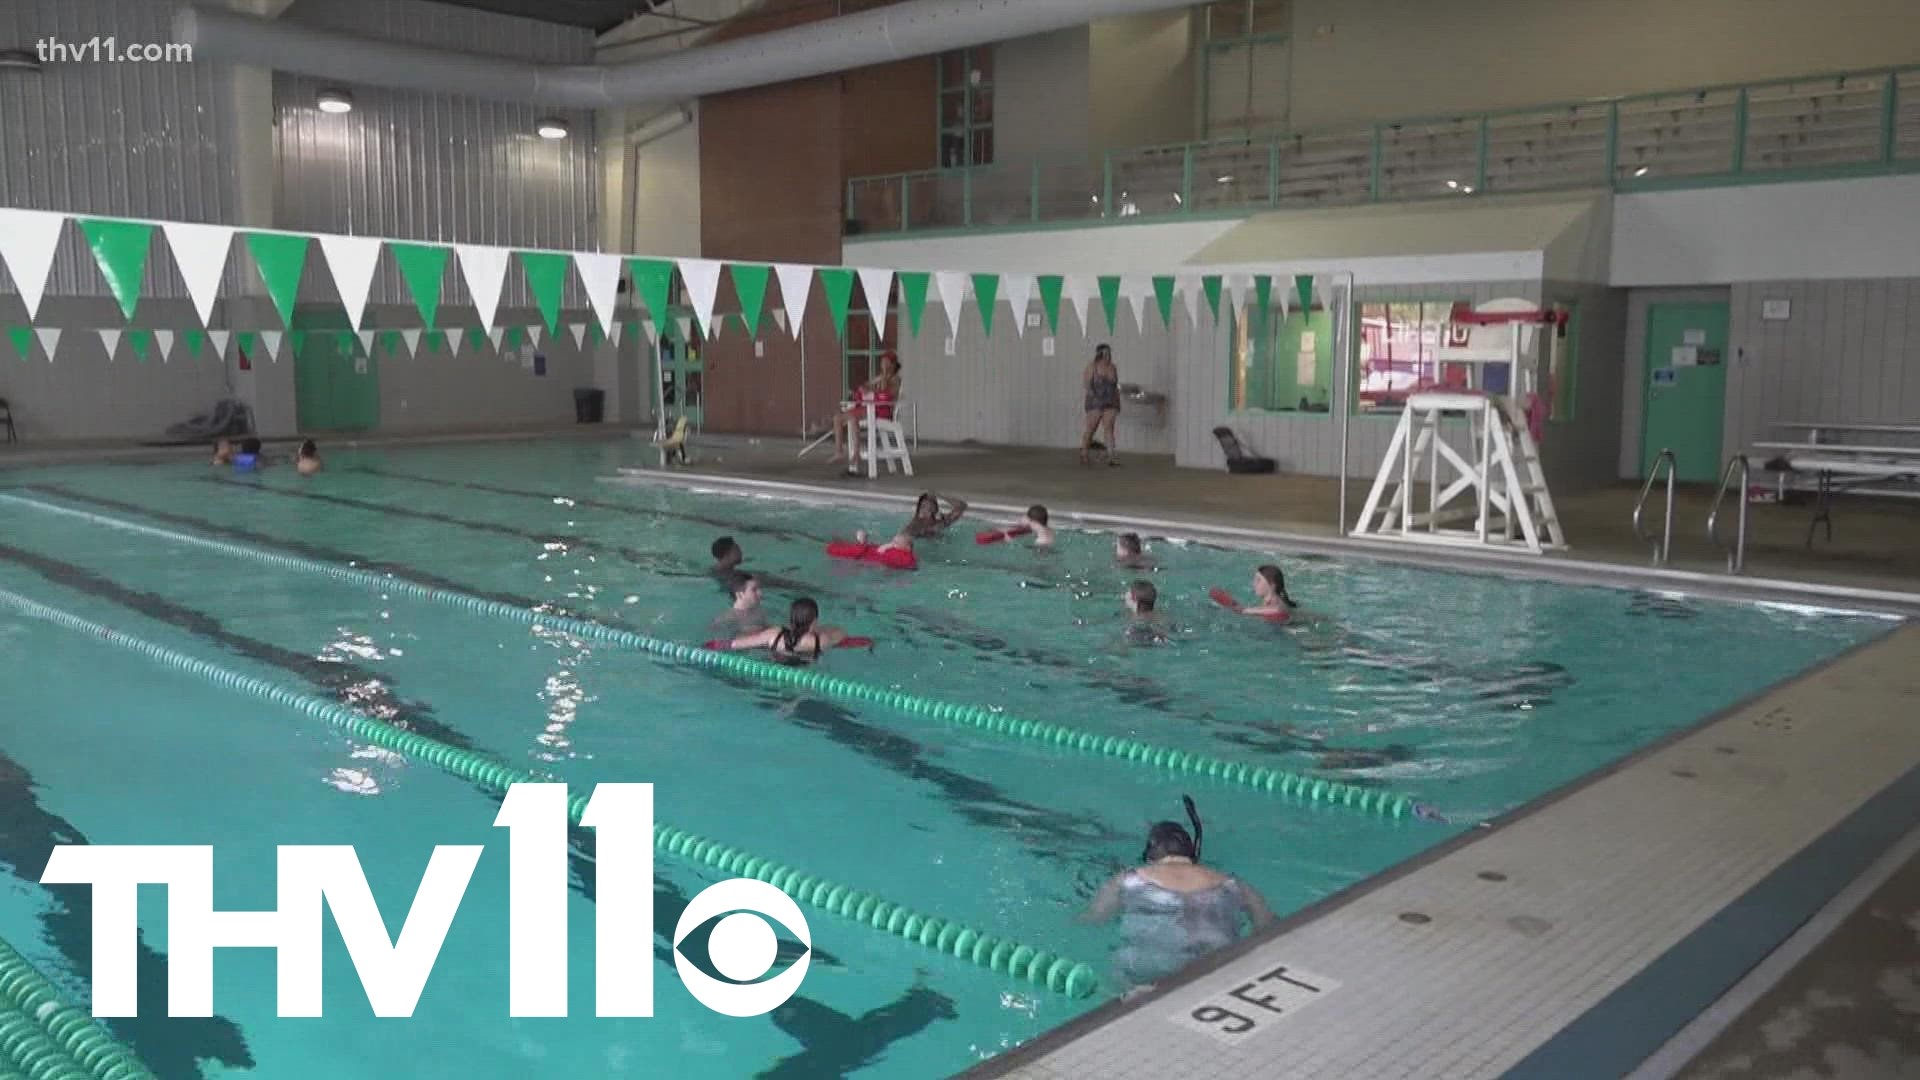 Summer is here and everyone is excited to head to the pool. But community centers in Central Arkansas are suffering from a life guard shortage.